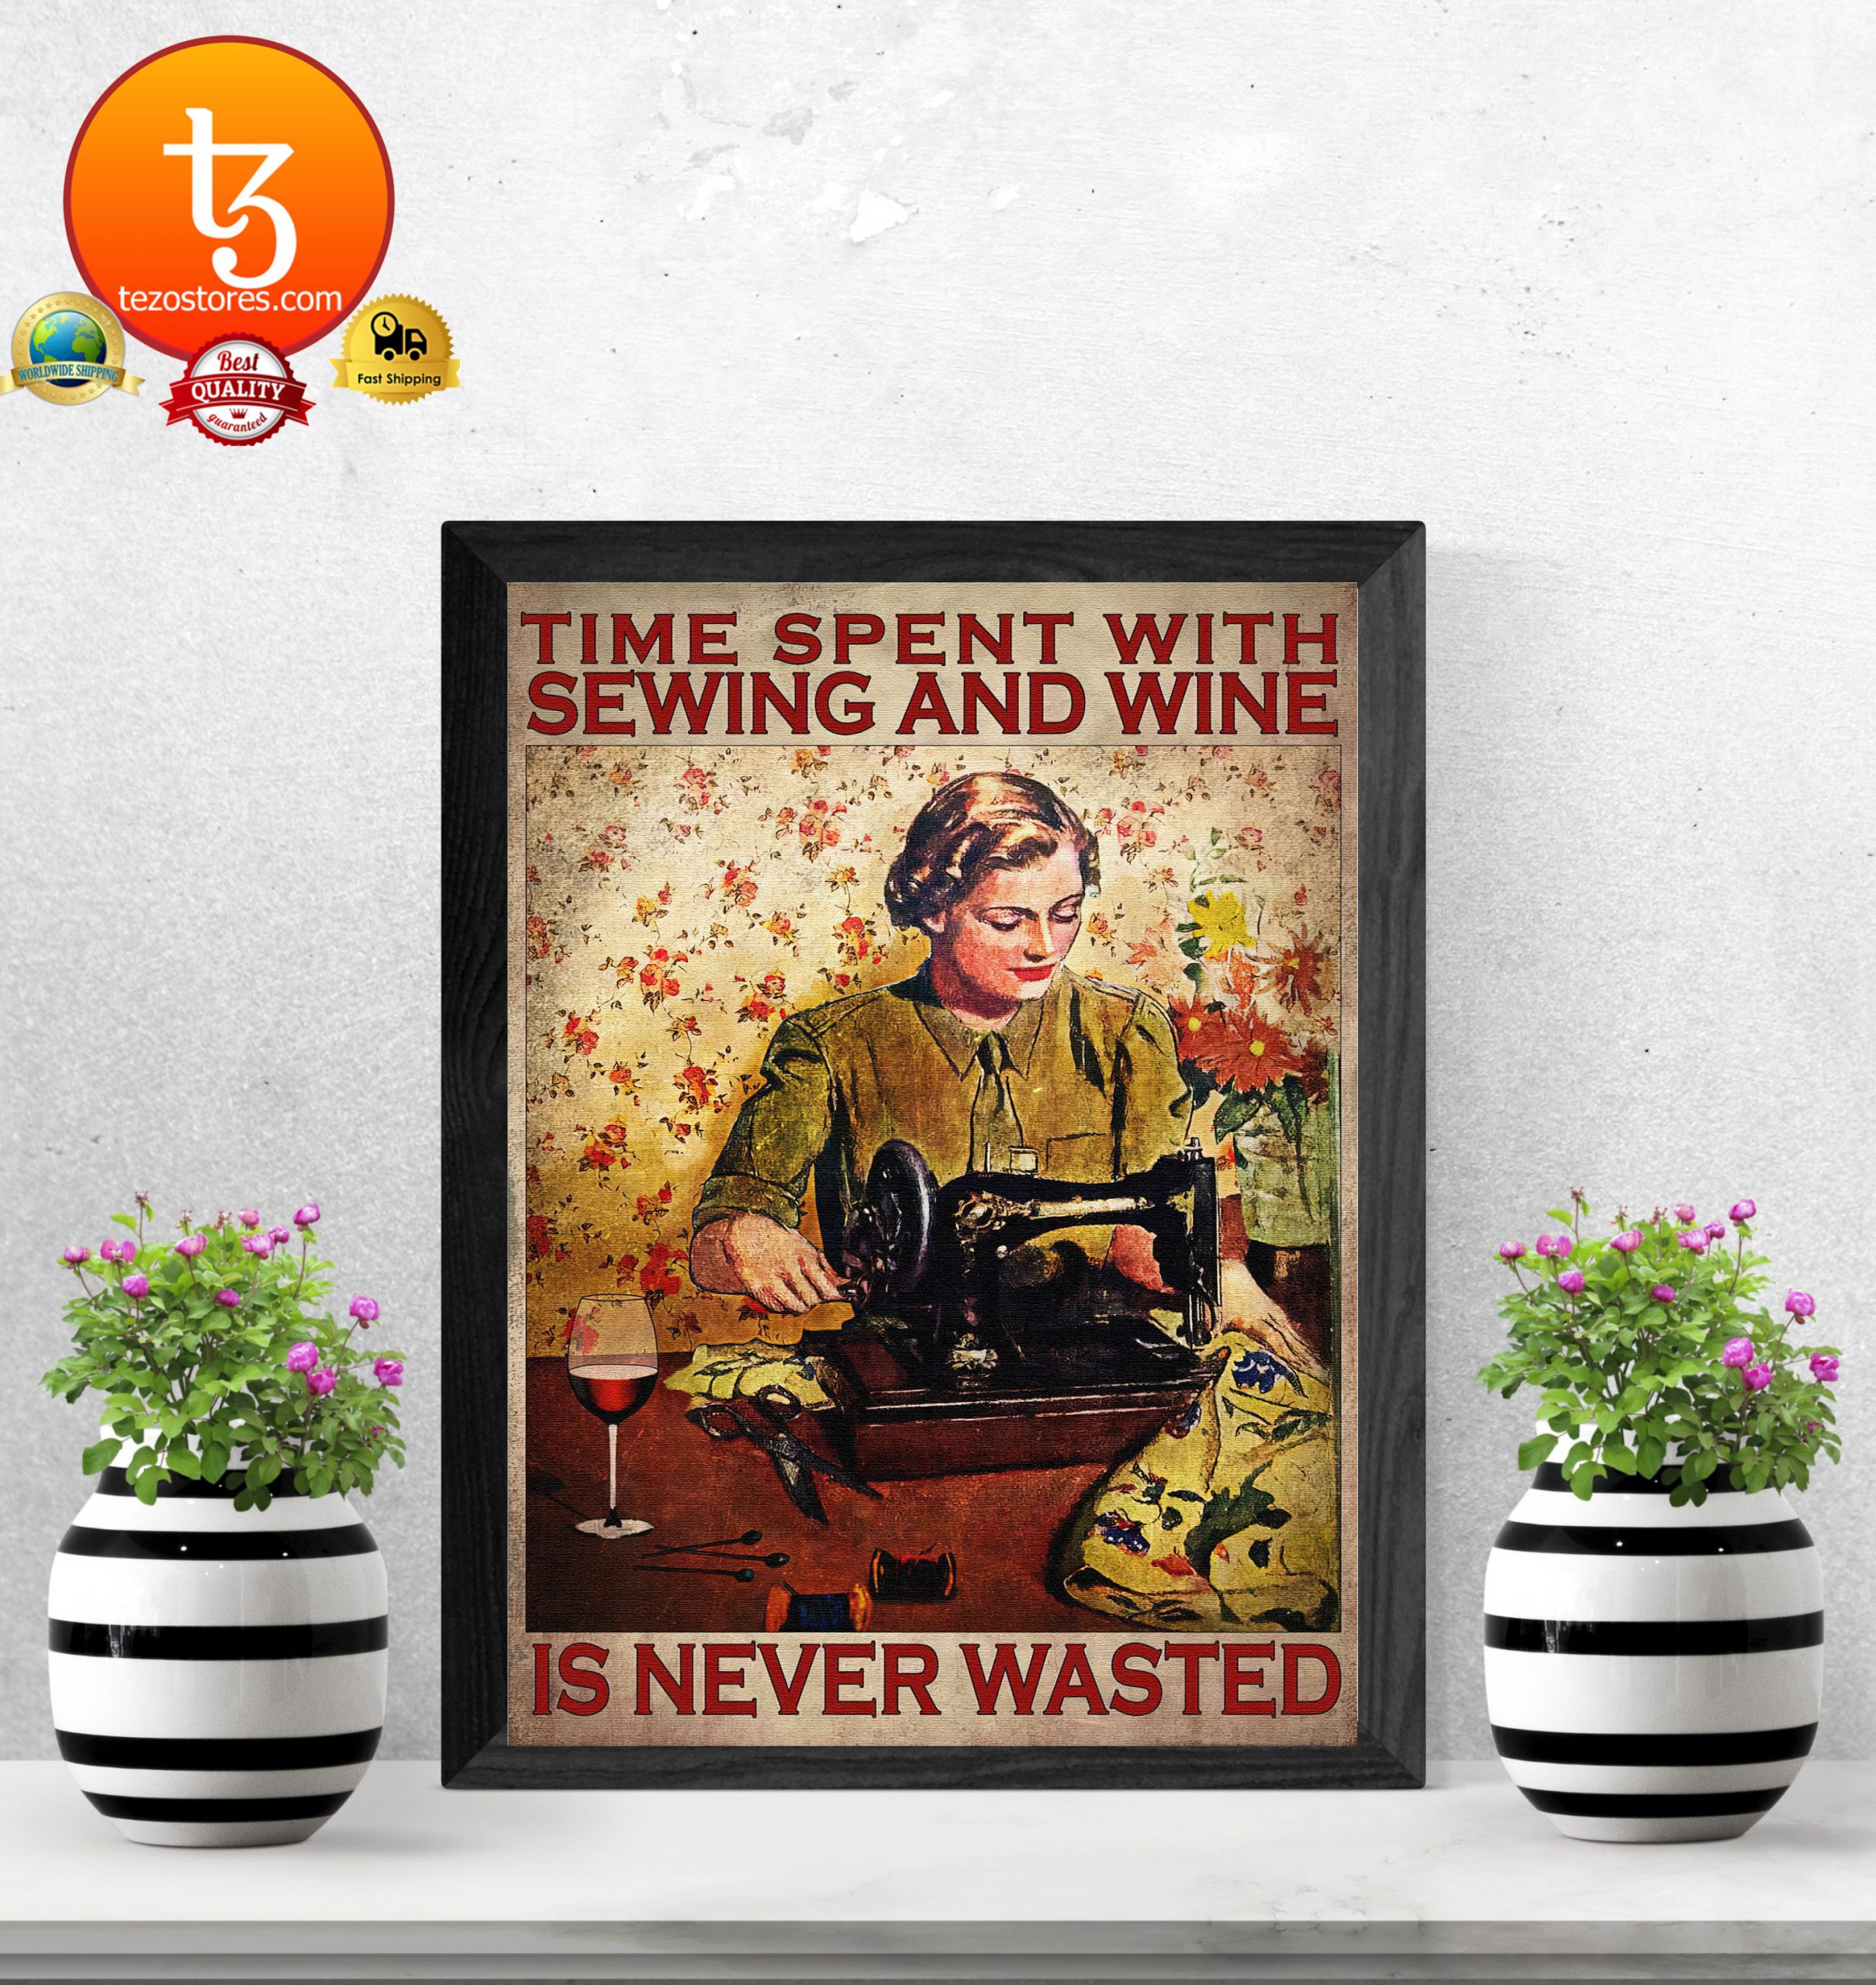 Time spent with sewing and wine is never wasted poster3